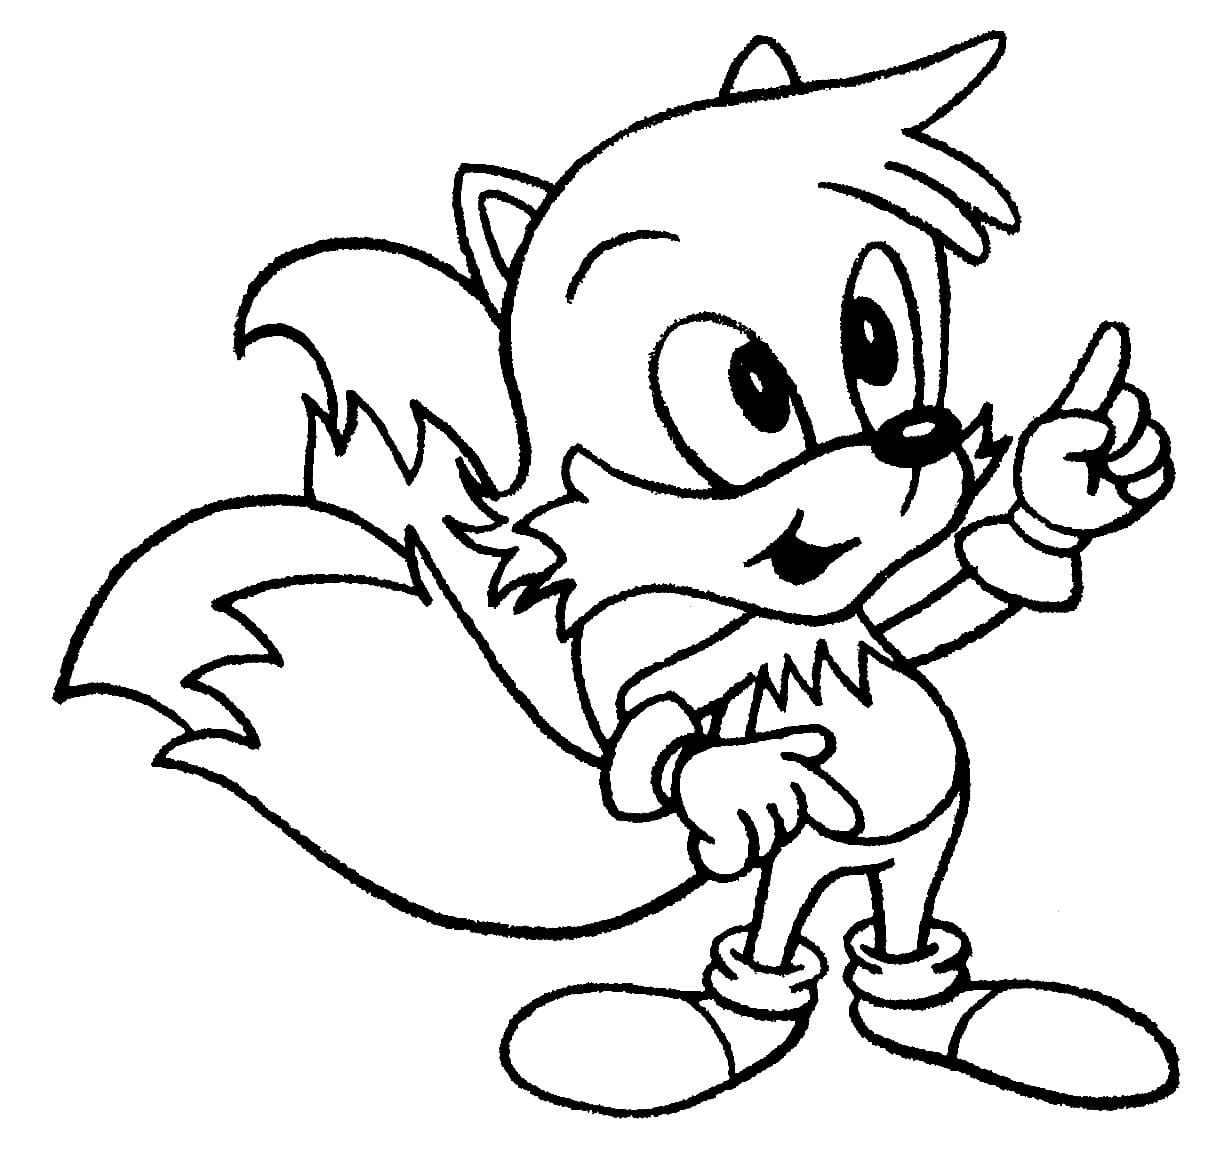 Little Tails coloring page - Download, Print or Color Online for Free